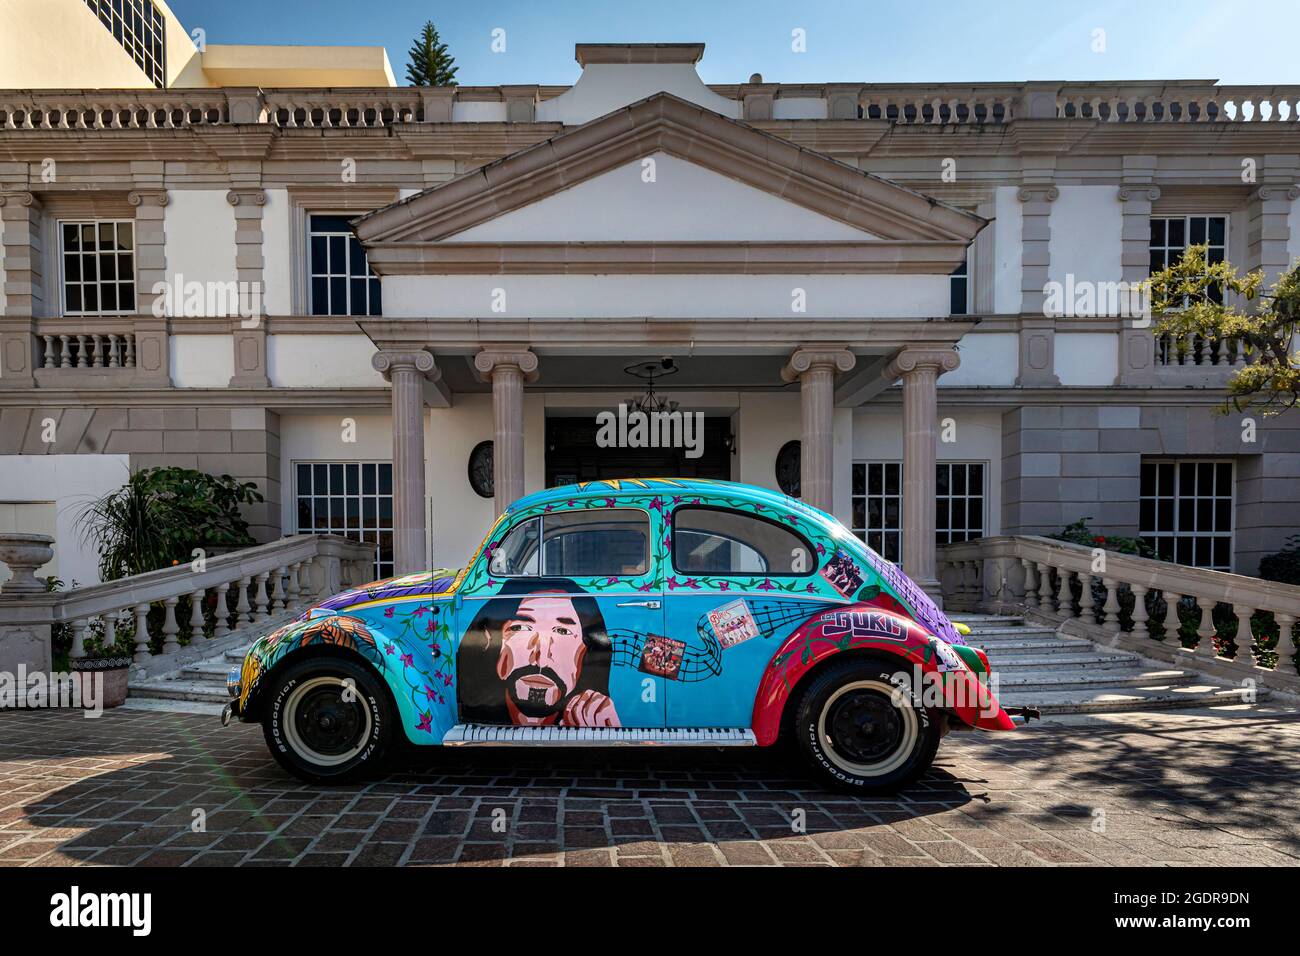 Unique VW Bug gifted to Marco Antonio Solis, aka El Buki, parked in front of his home in Morelia, Michoacan, Mexico. Stock Photo